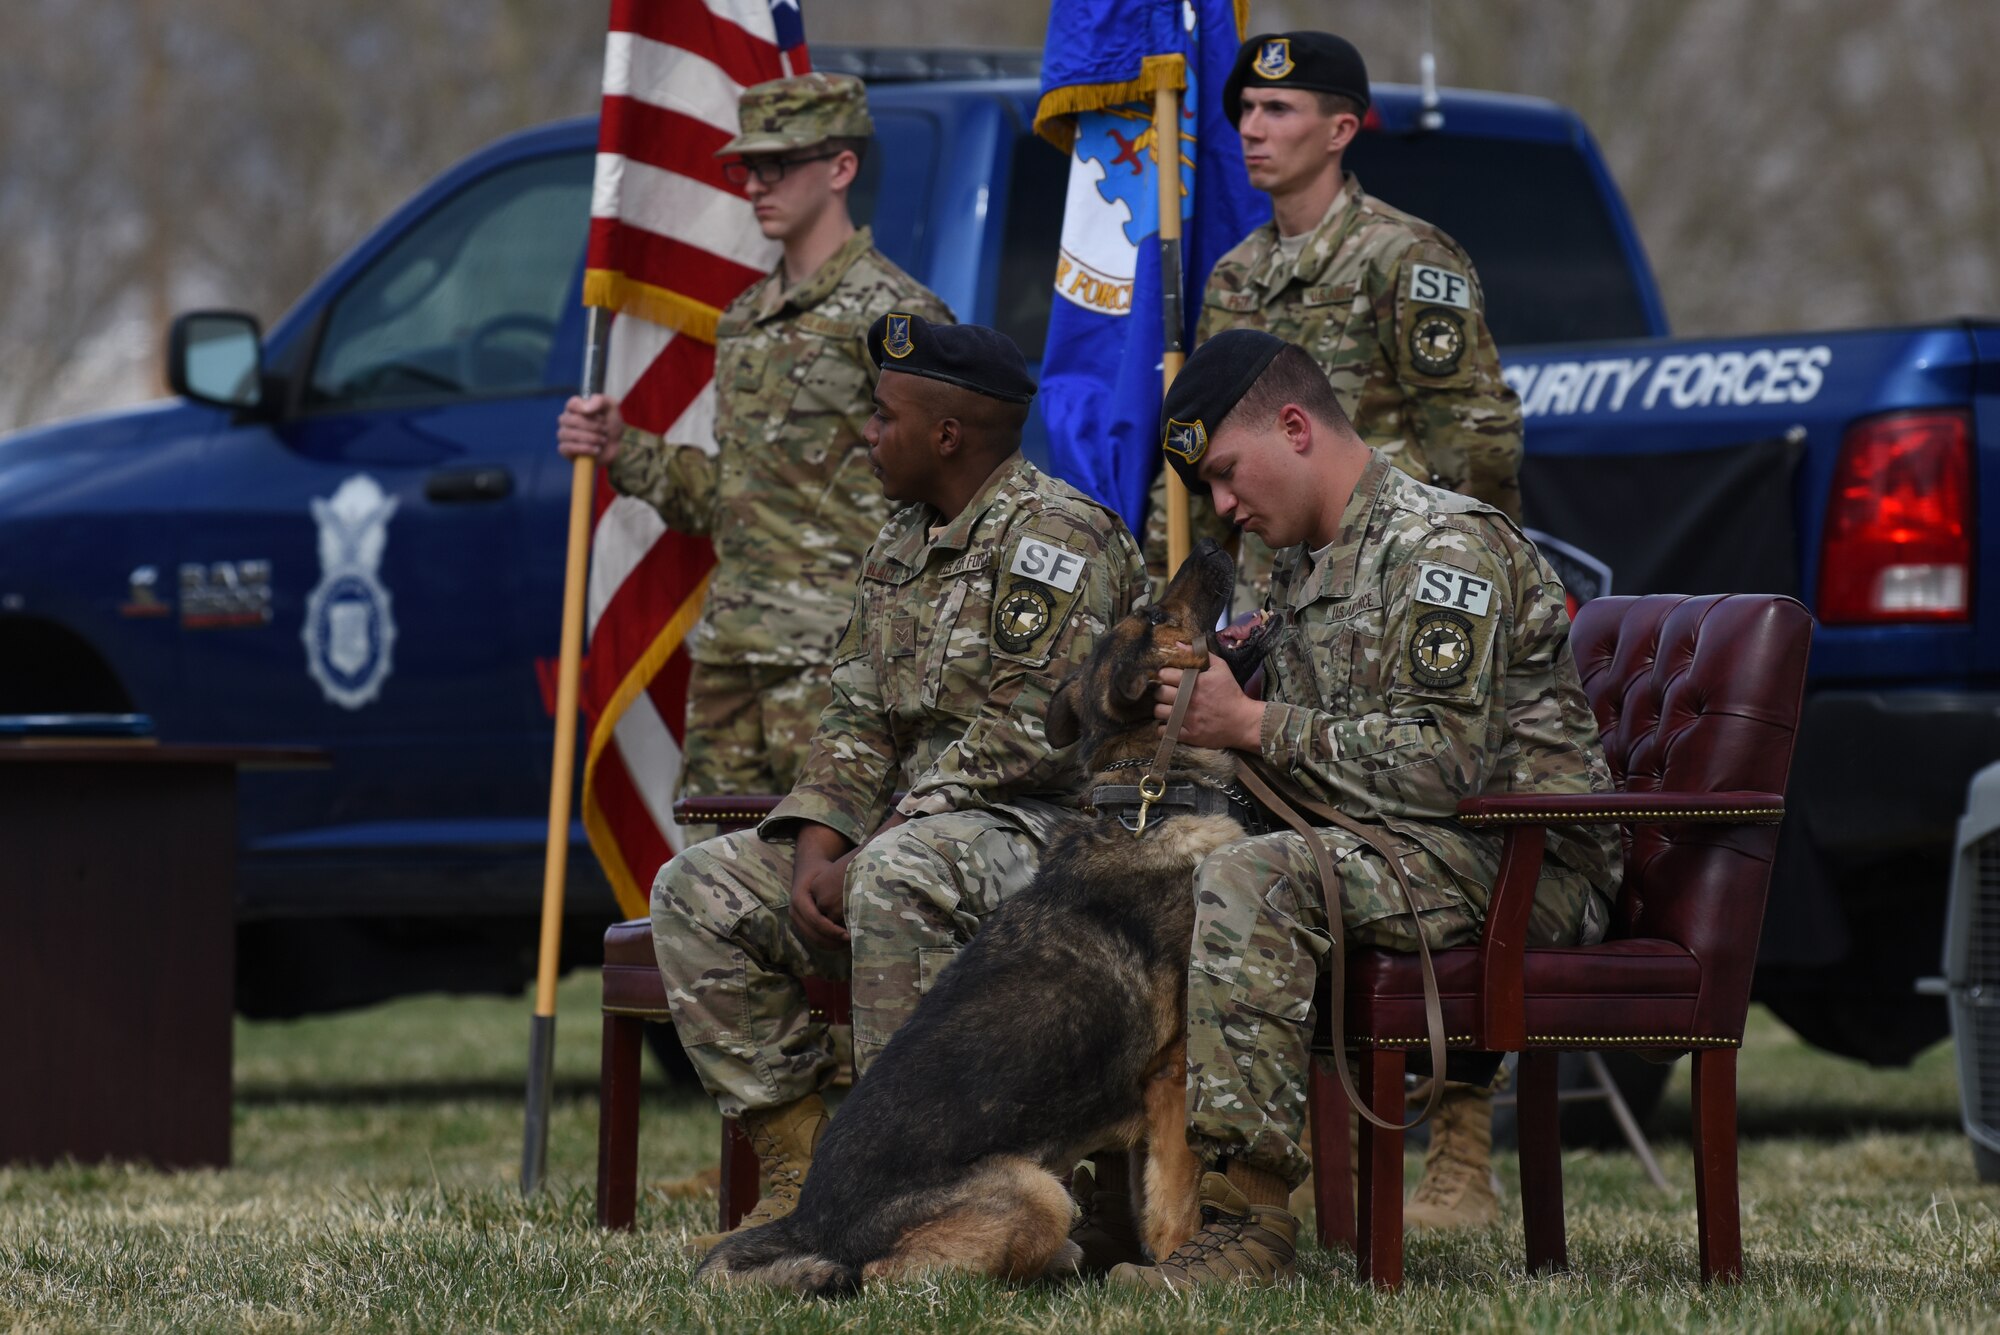 U.S. Air Force Staff Sgt. Austin Clark, 377th Security Forces Squadron military working dog handler, embraces MWD Boris after Boris’s retirement at Kirtland Air Force Base, N.M., March 26, 2019. Clark is in the process of adopting Boris. (U.S. Air Force photo by Senior Airman Eli Chevaler)